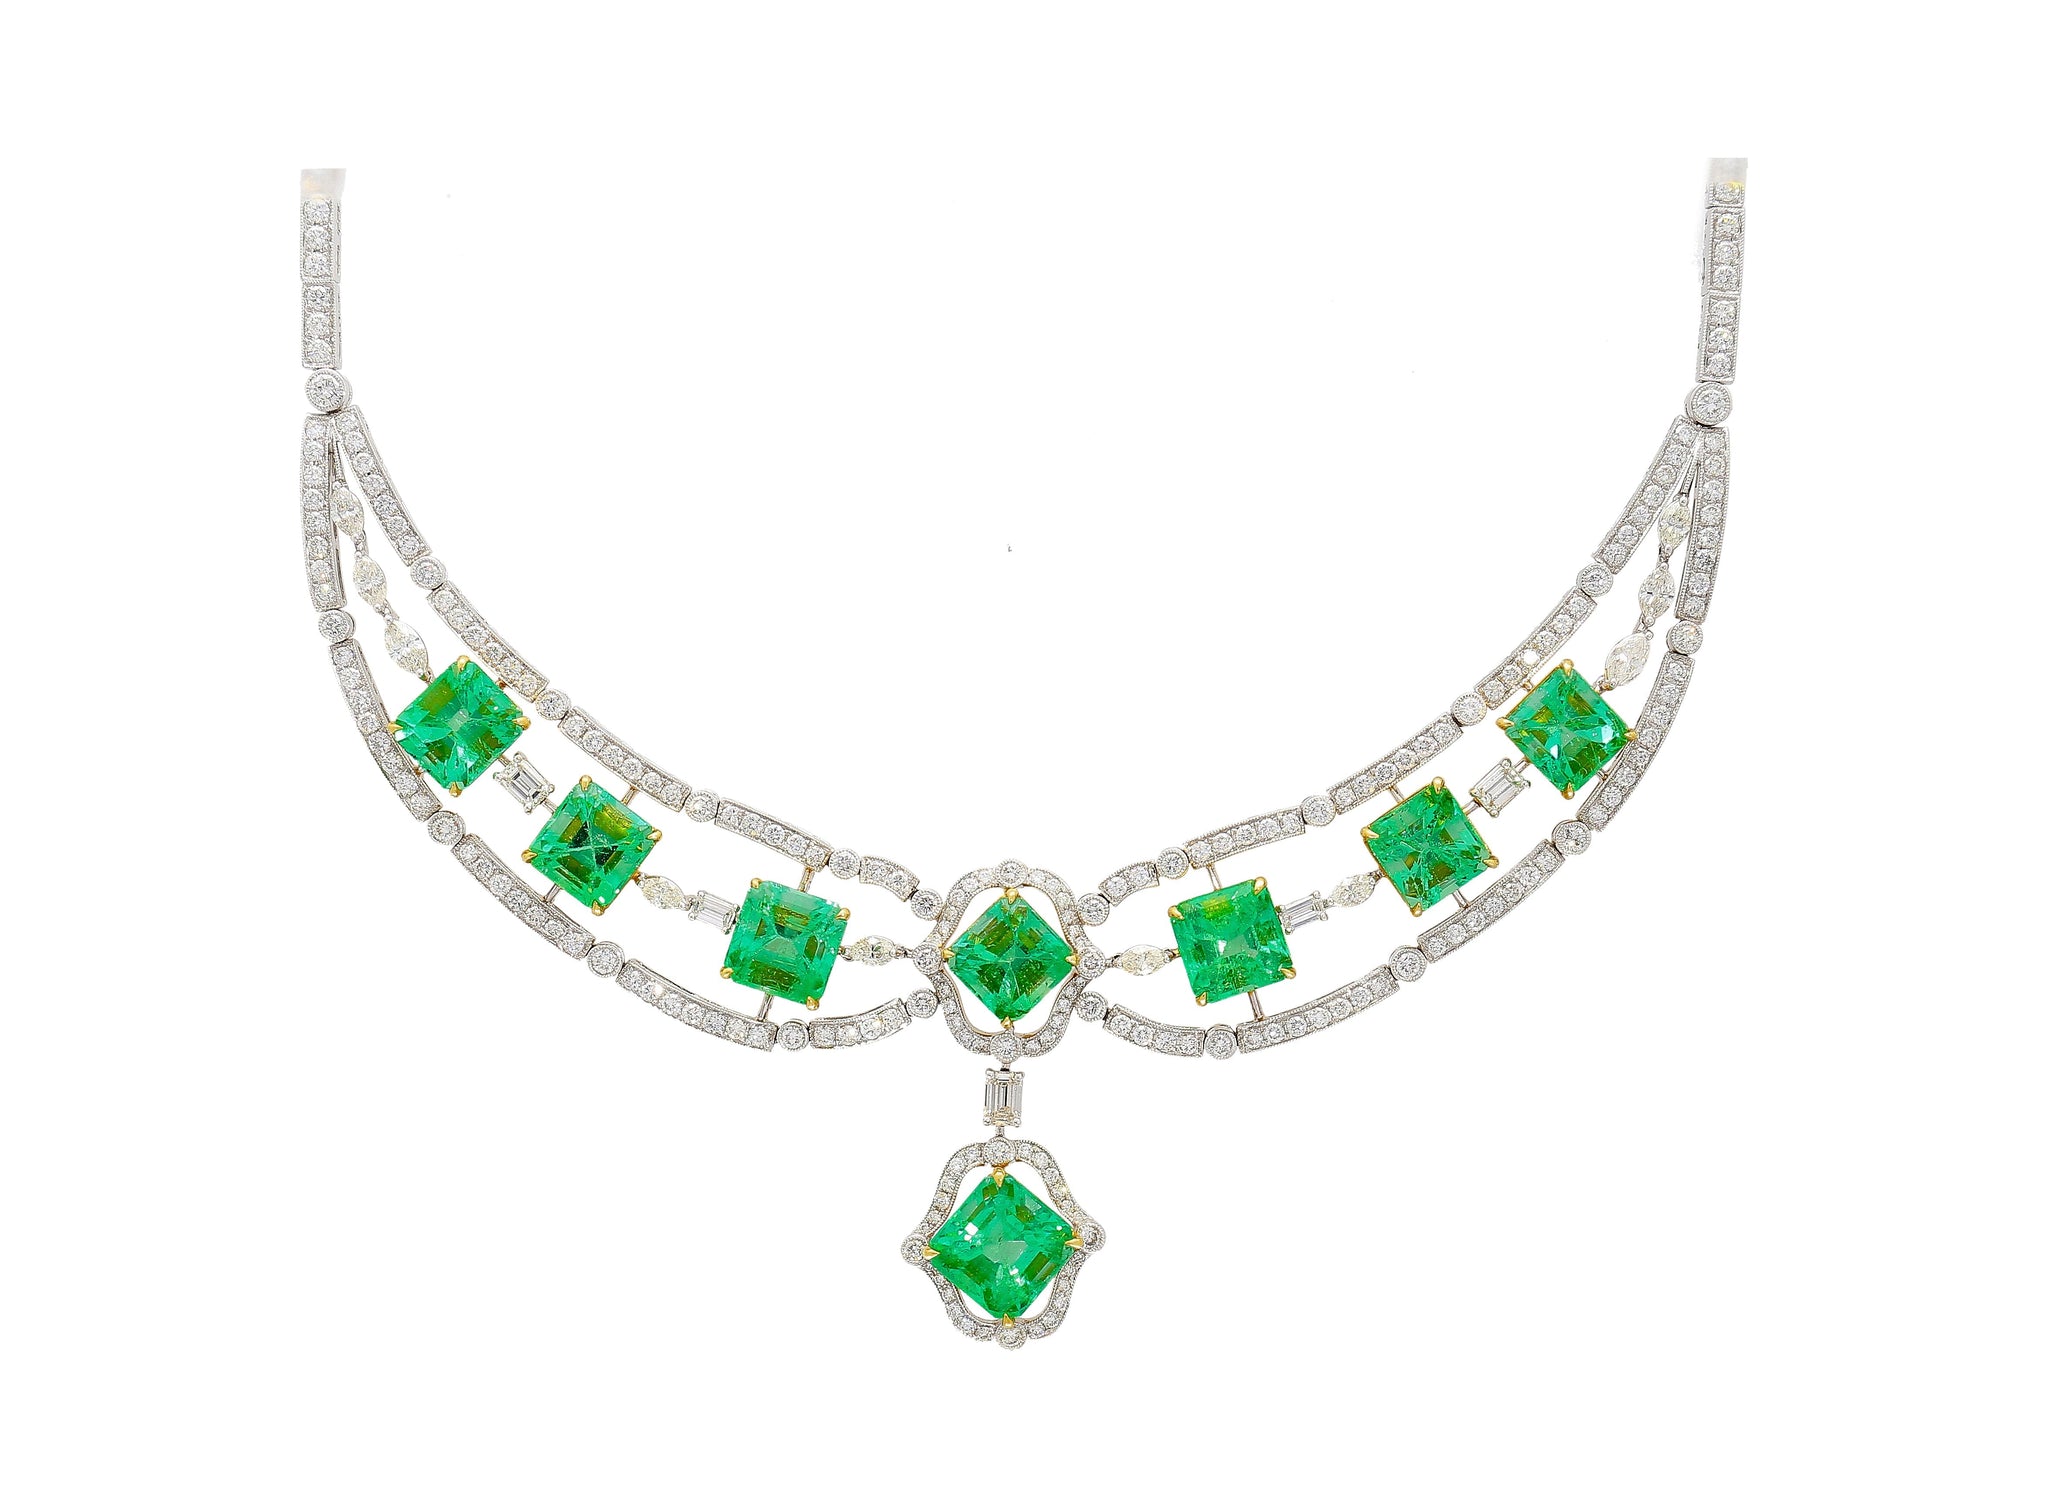 GIA Certified 6.21 Carat Emerald and 30.38 Carat Emerald With 9.86 Carat Diamonds Chandelier Necklace